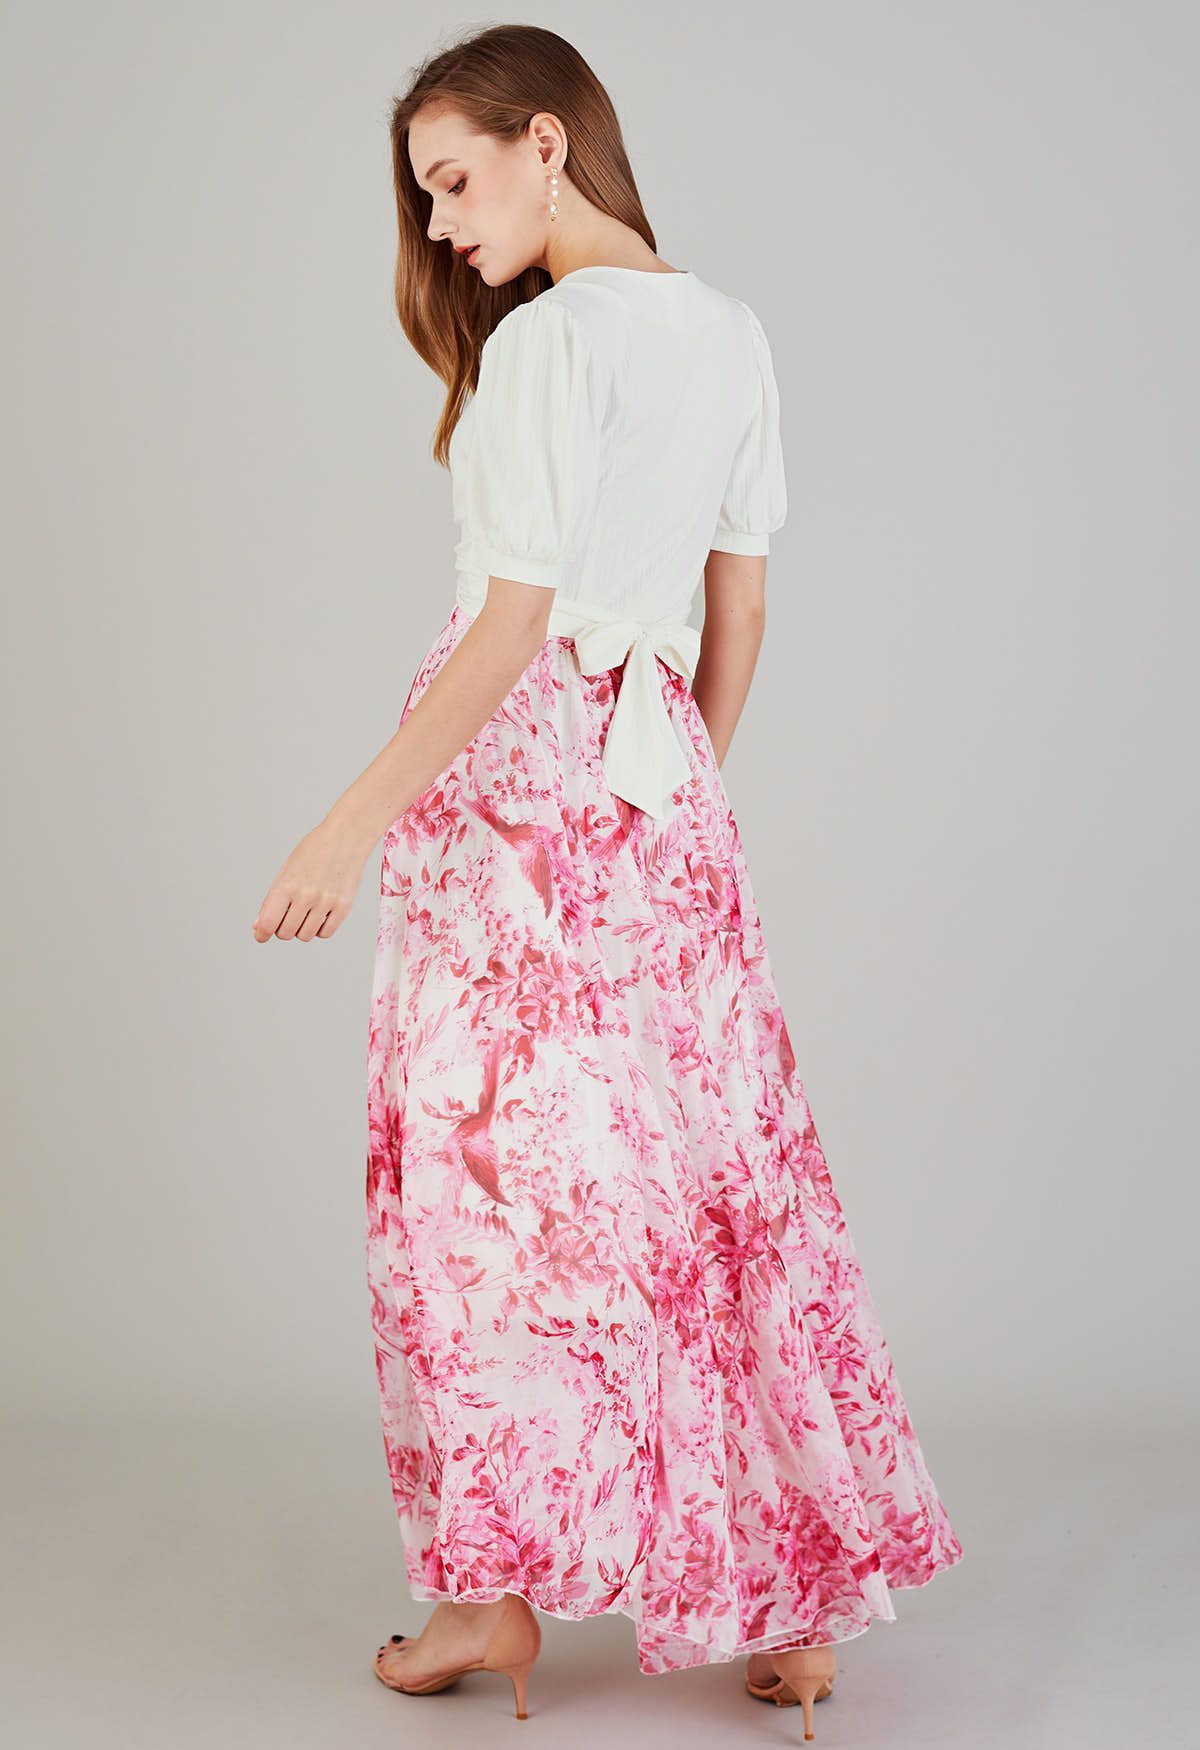 Summer Forest Printed Chiffon Maxi Skirt in Pink